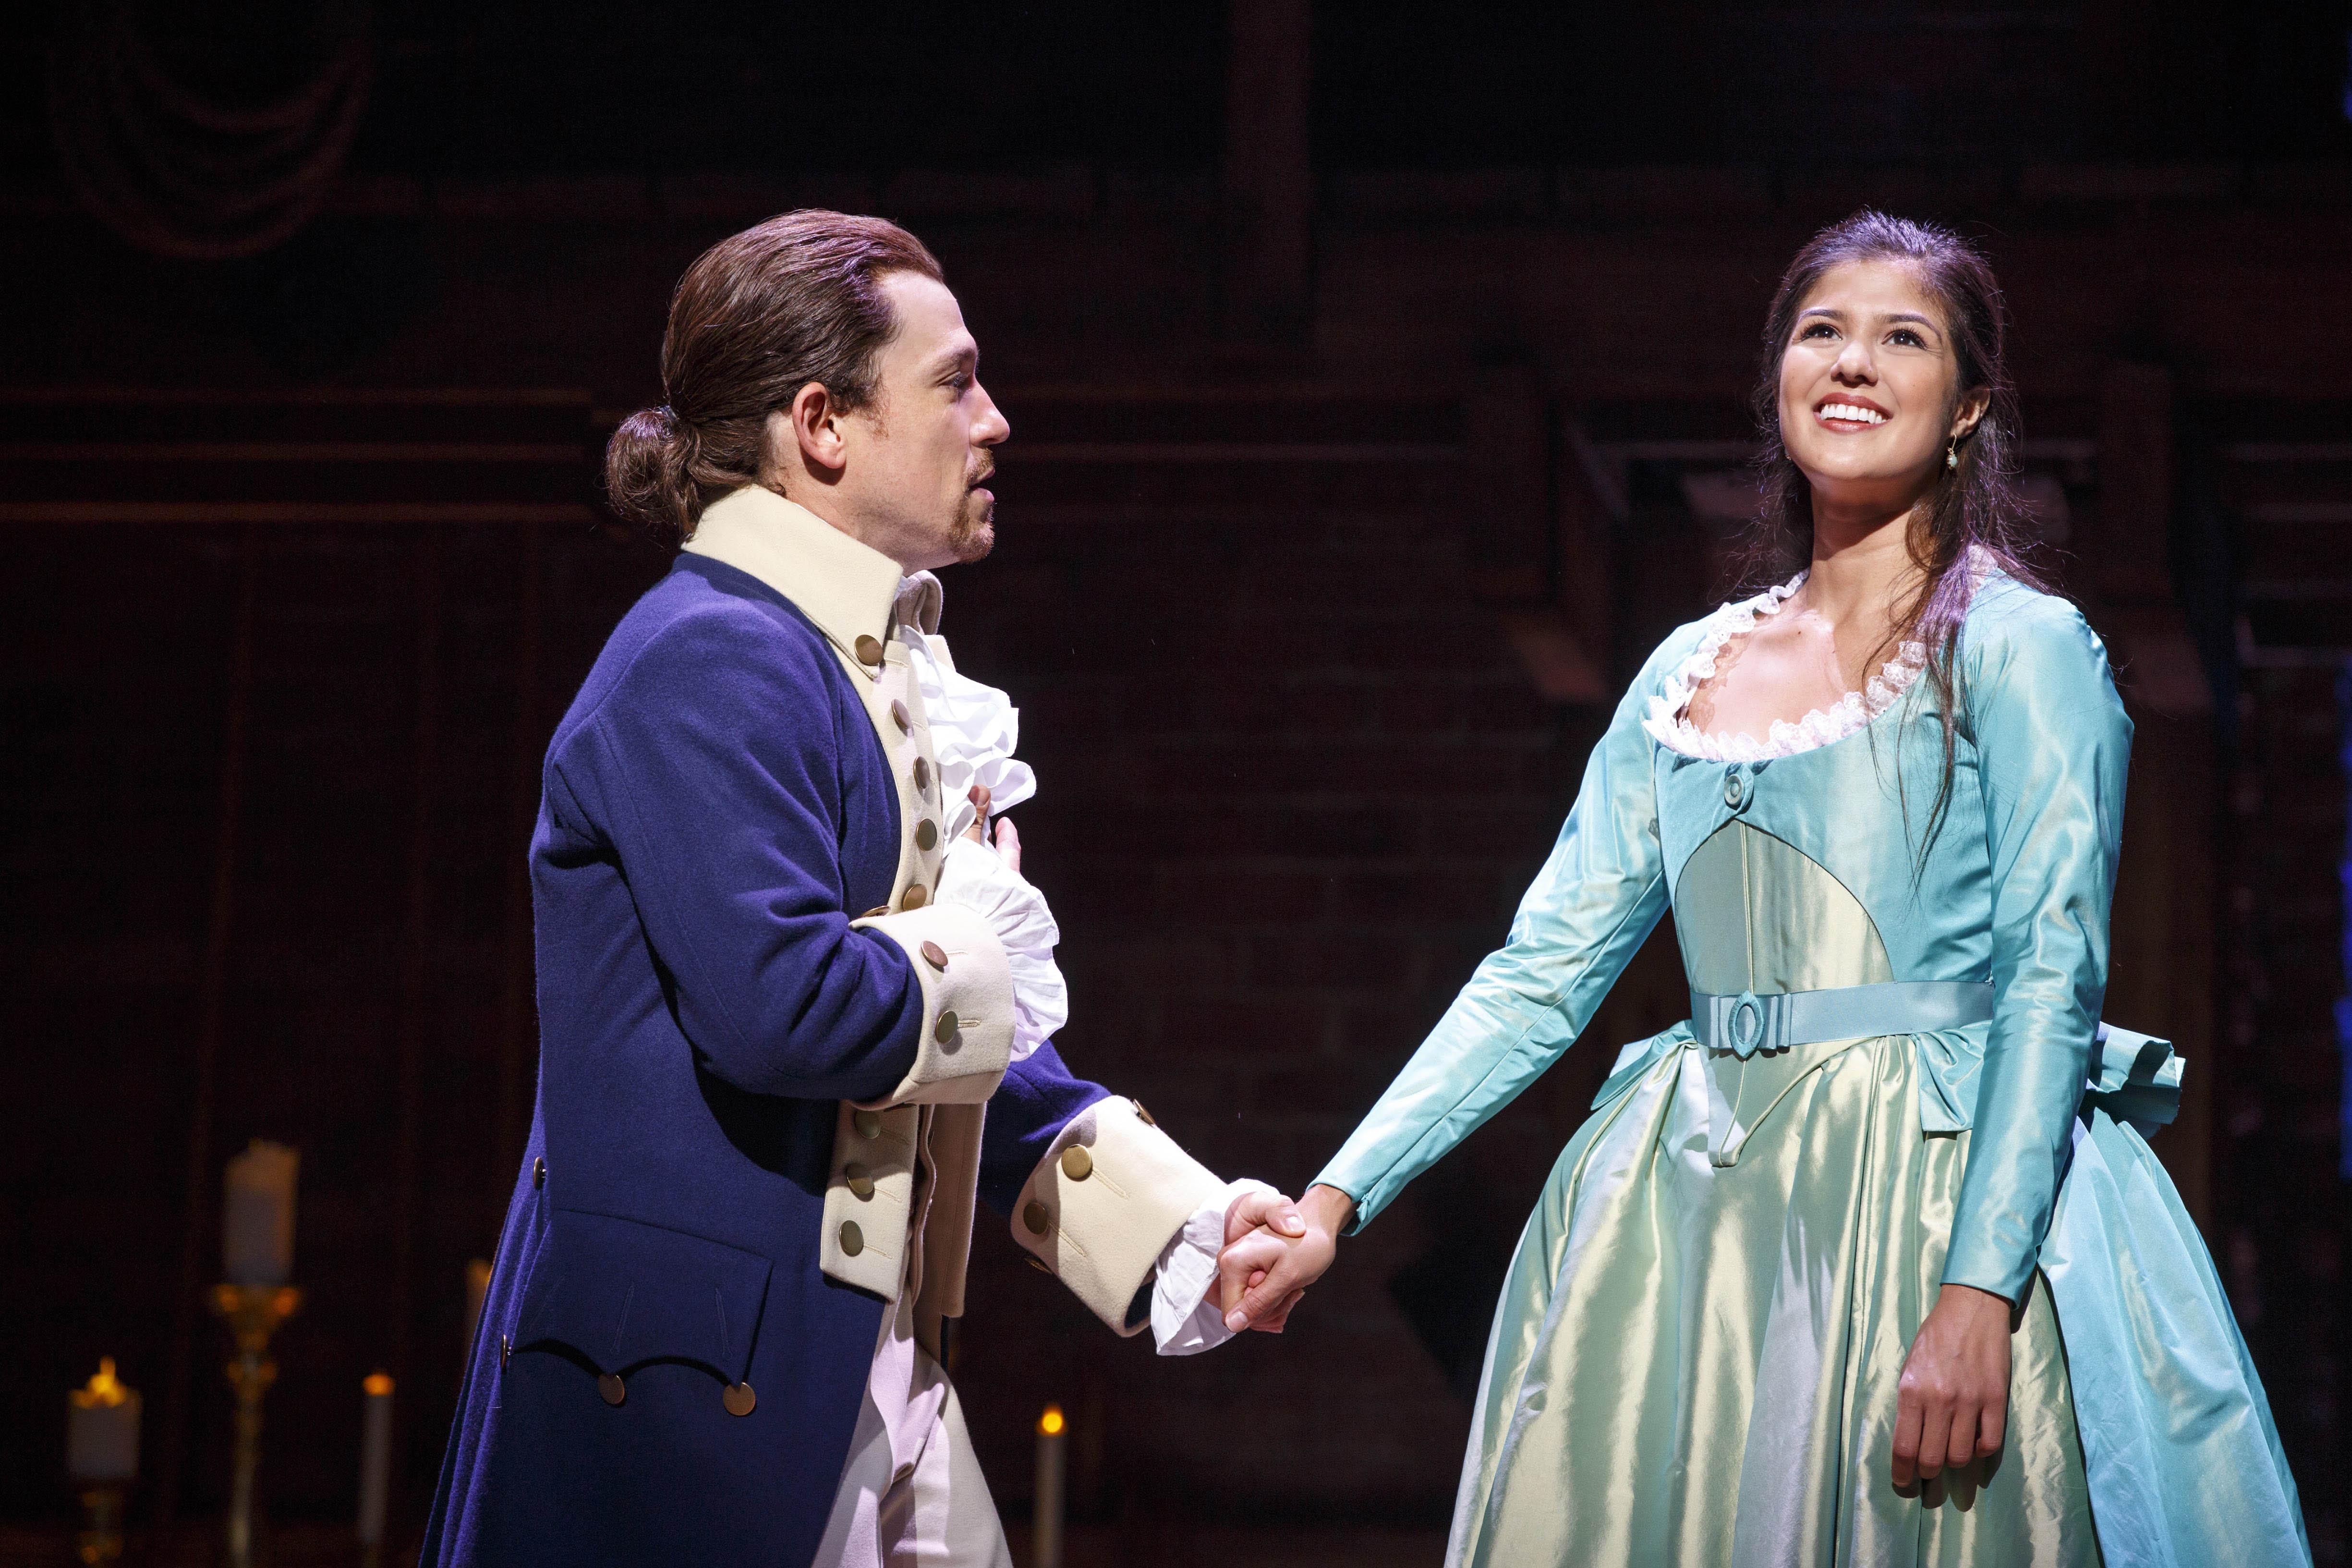 Miguel Cervantes and Ari Asfar in the Chicago production of “Hamilton: An American Musical.” (Joan Marcus / Broadway in Chicago)